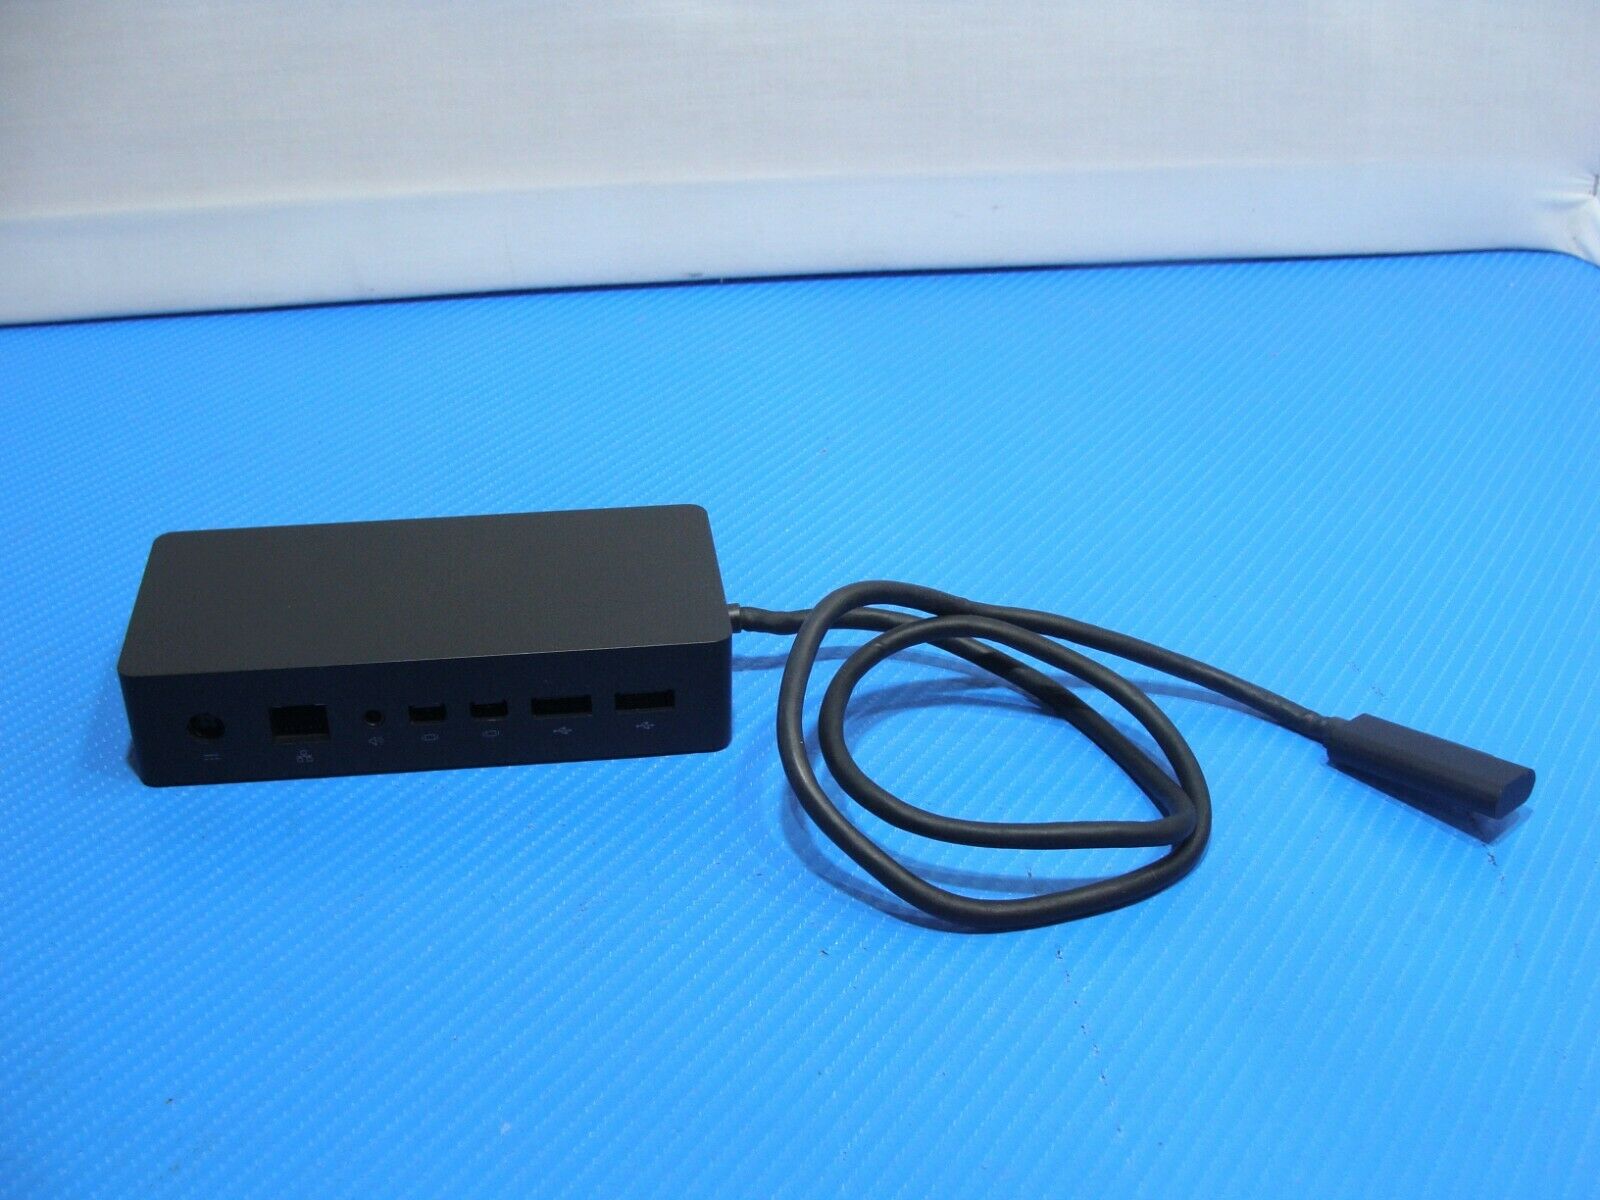 Microsoft Surface Docking Station Dock Model 1661 with Power Adapter Model 1749 